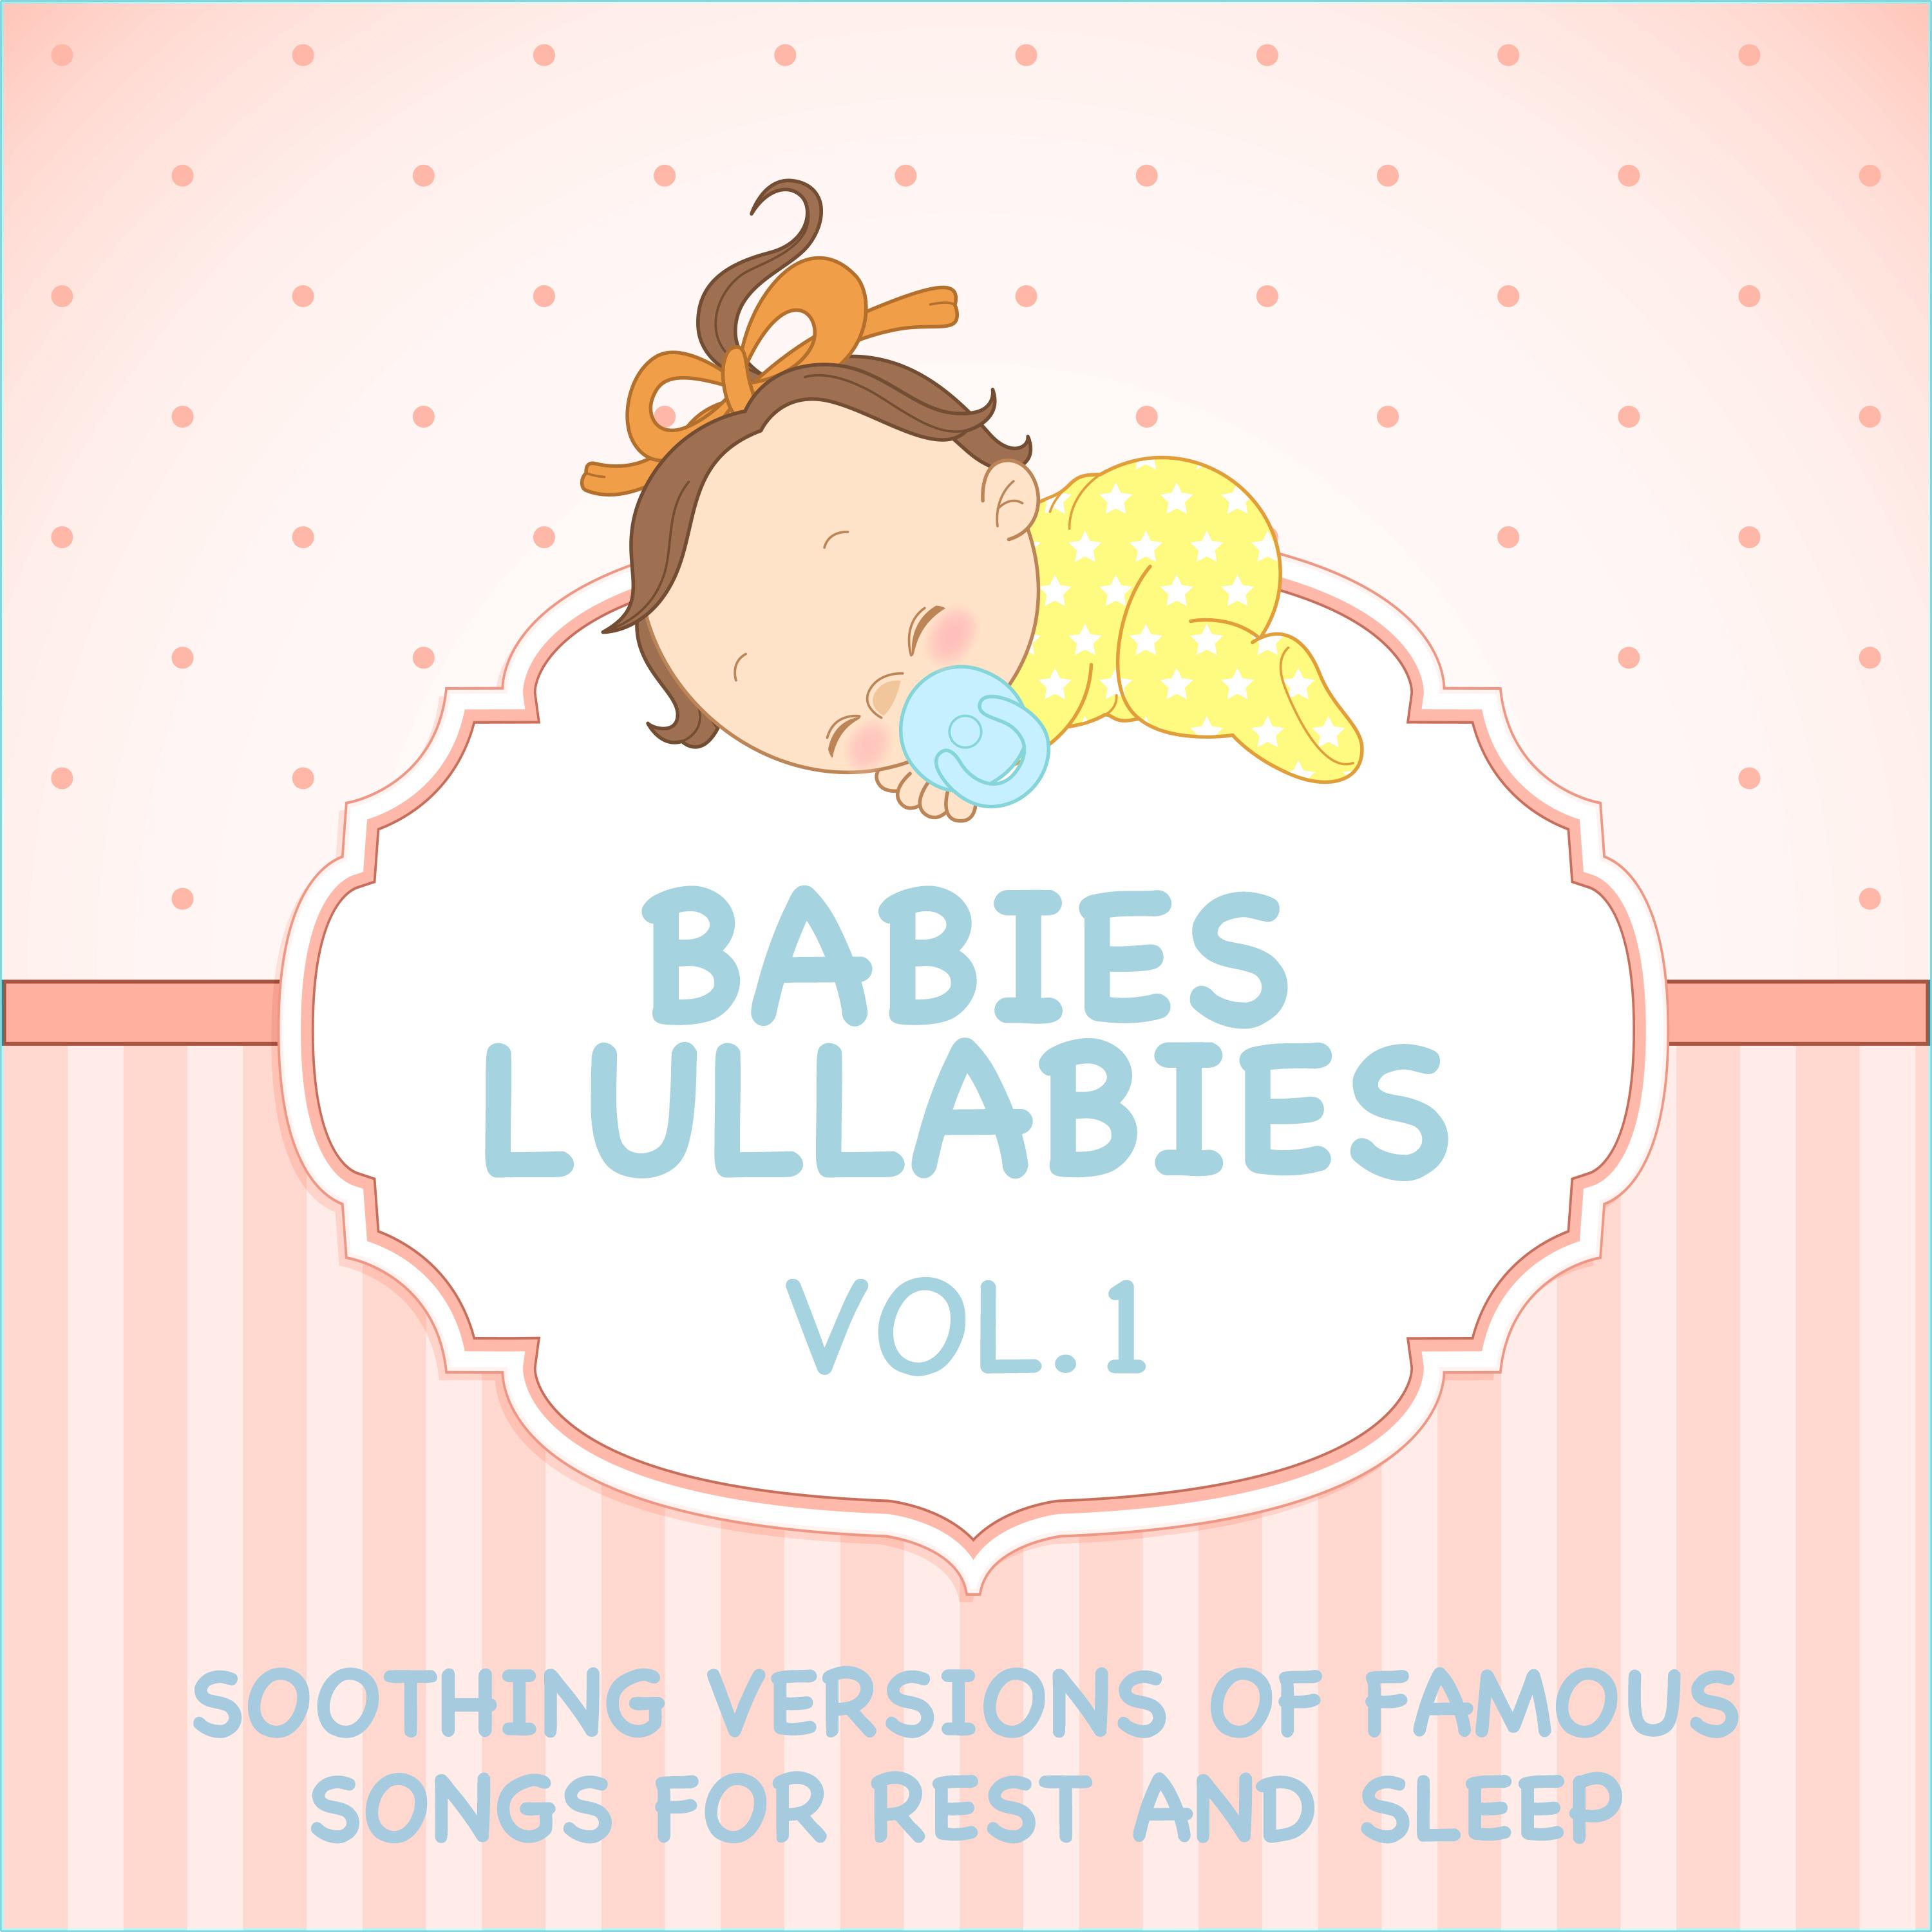 Babies Lullabies - Soothing Versions of Famous Songs for Rest and Sleep, Vol. 1